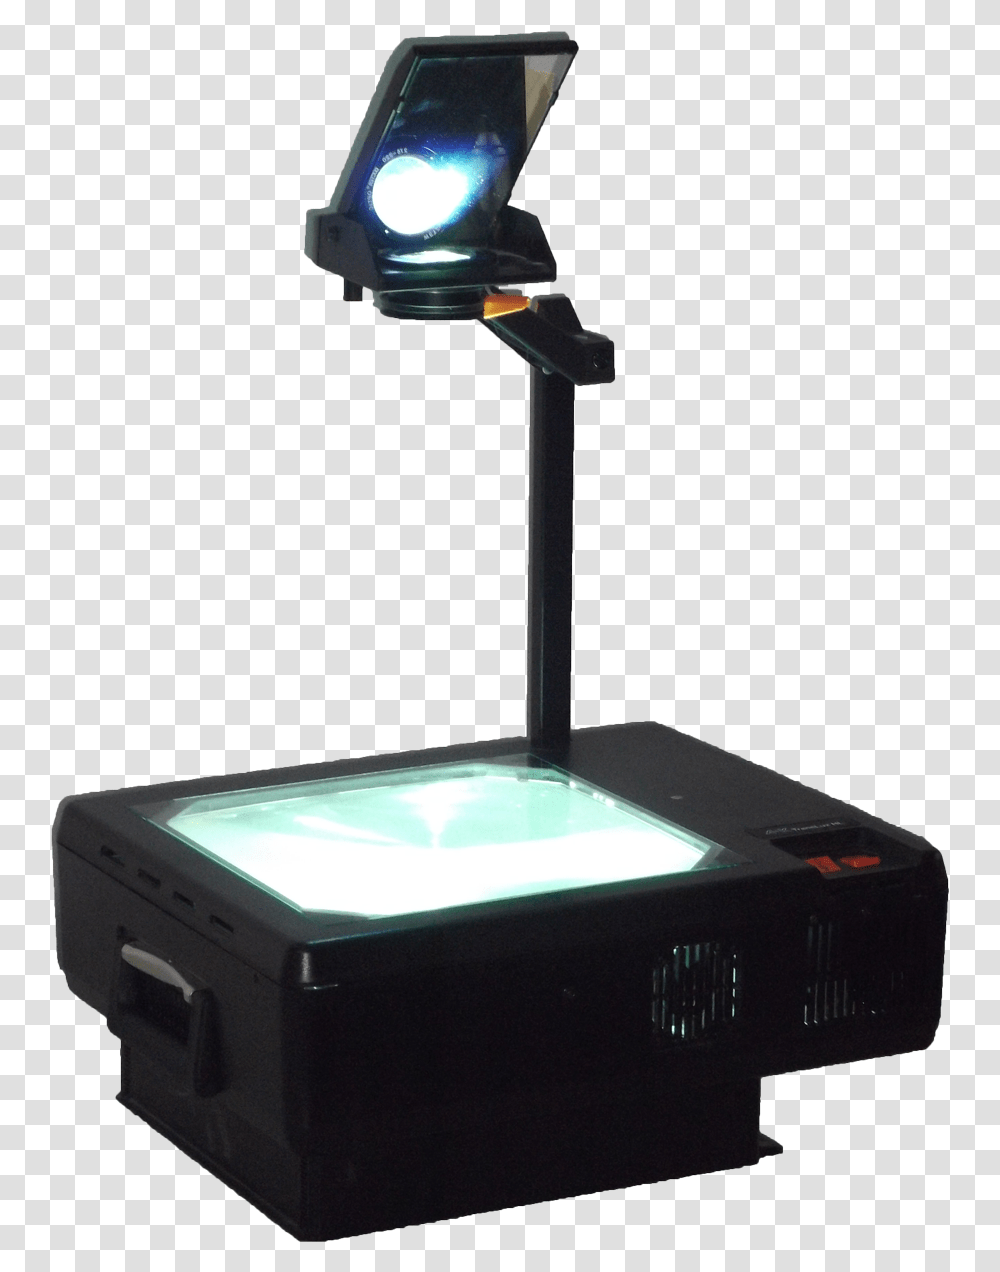 Download Ohp A Poem About Light Overhead Projector Overhead Projector, Lighting, Jacuzzi, Tub, Hot Tub Transparent Png